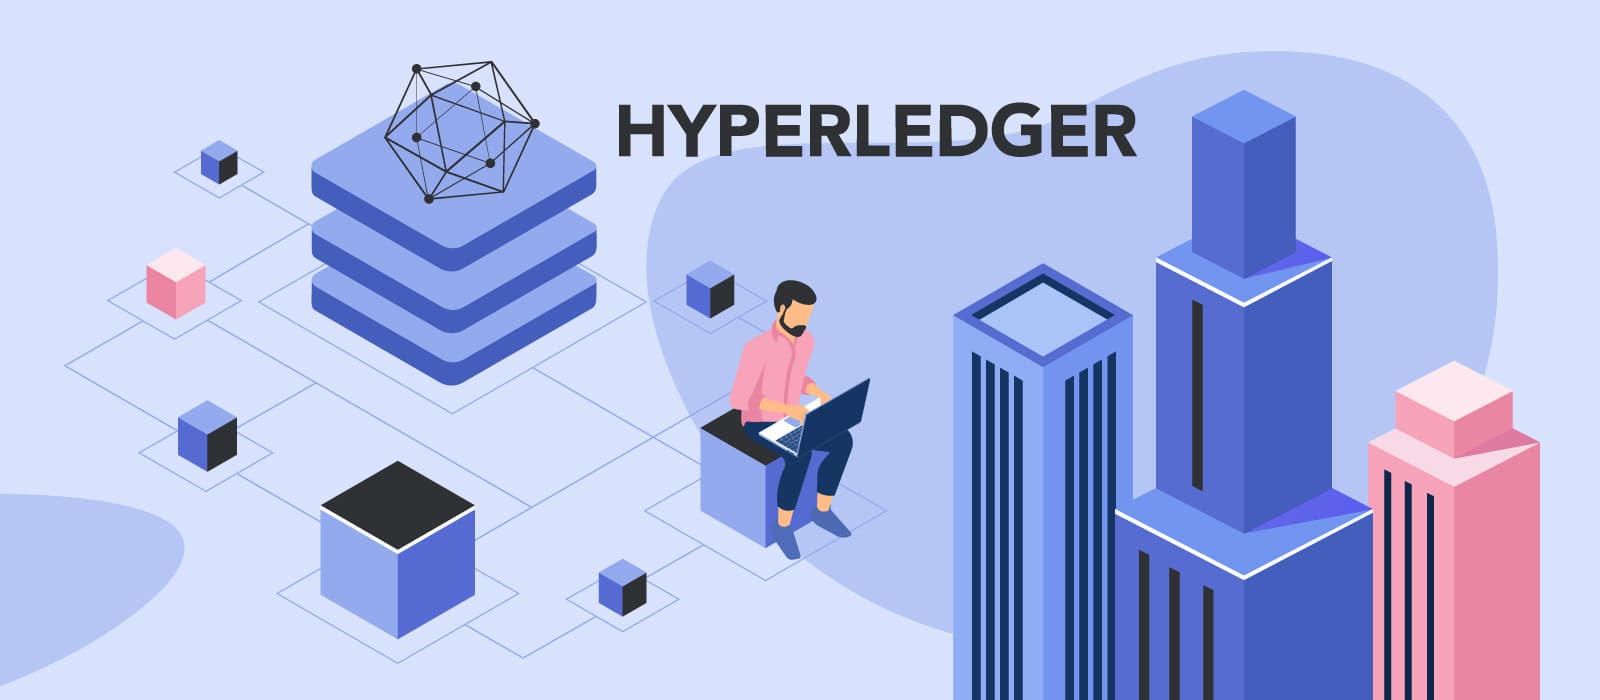 A person working on a laptop next to skyscrapers and Hyperledger logo